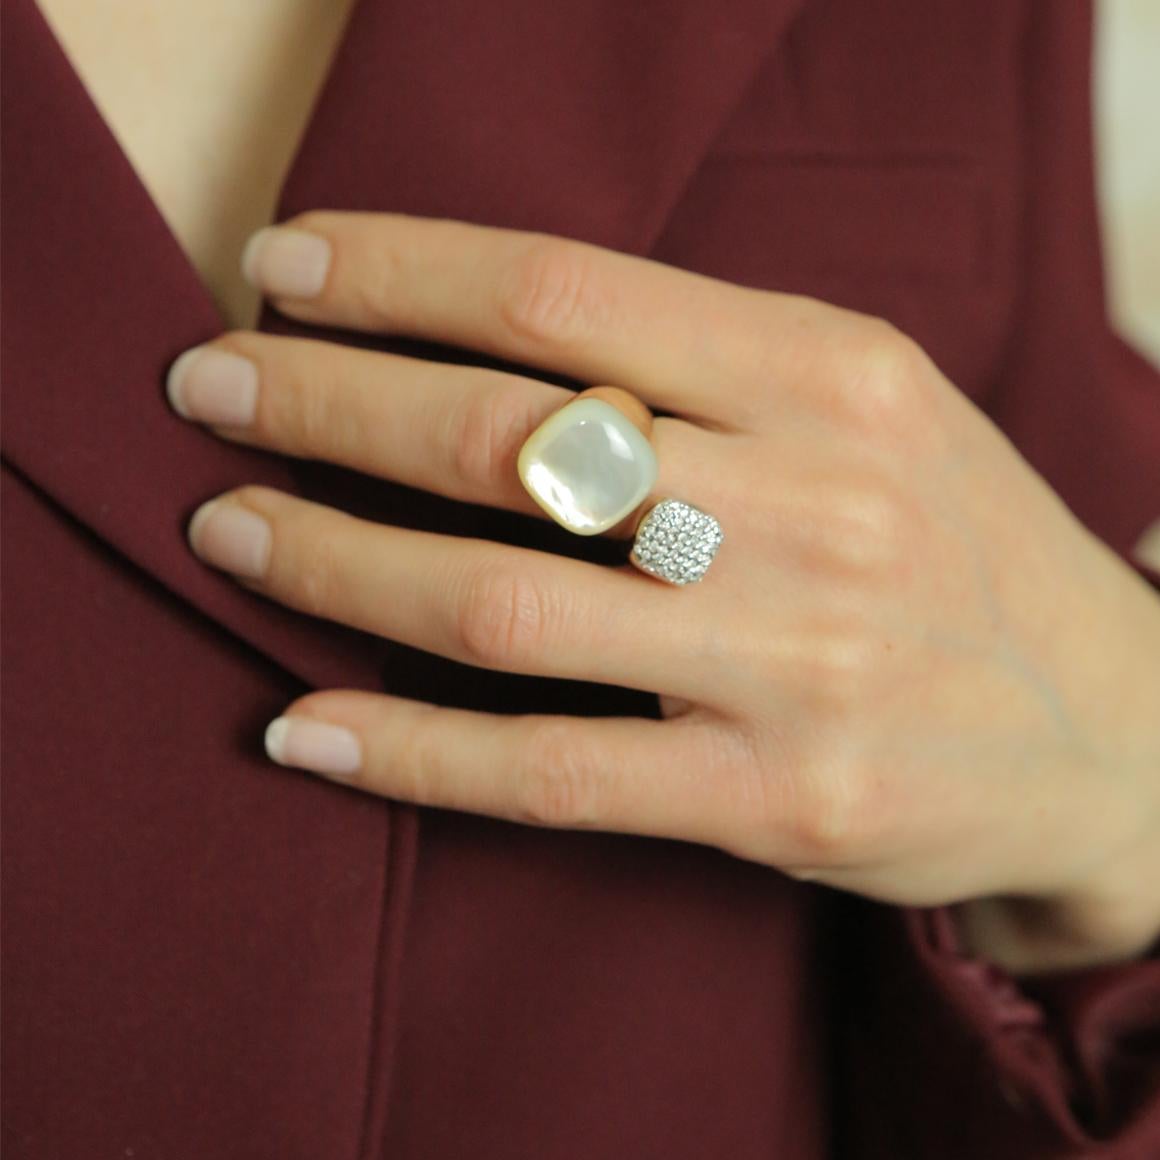 Timeless cocktail ring with Mother of Perls and diamonds.Timeless elegance for this fashion ring. Made in Italy by Stanoppi Jewellery since 1948.

Ring in 18k white gold with Mother of Pearl (square cabochon cut, size: 16x16 mm) and white Diamonds